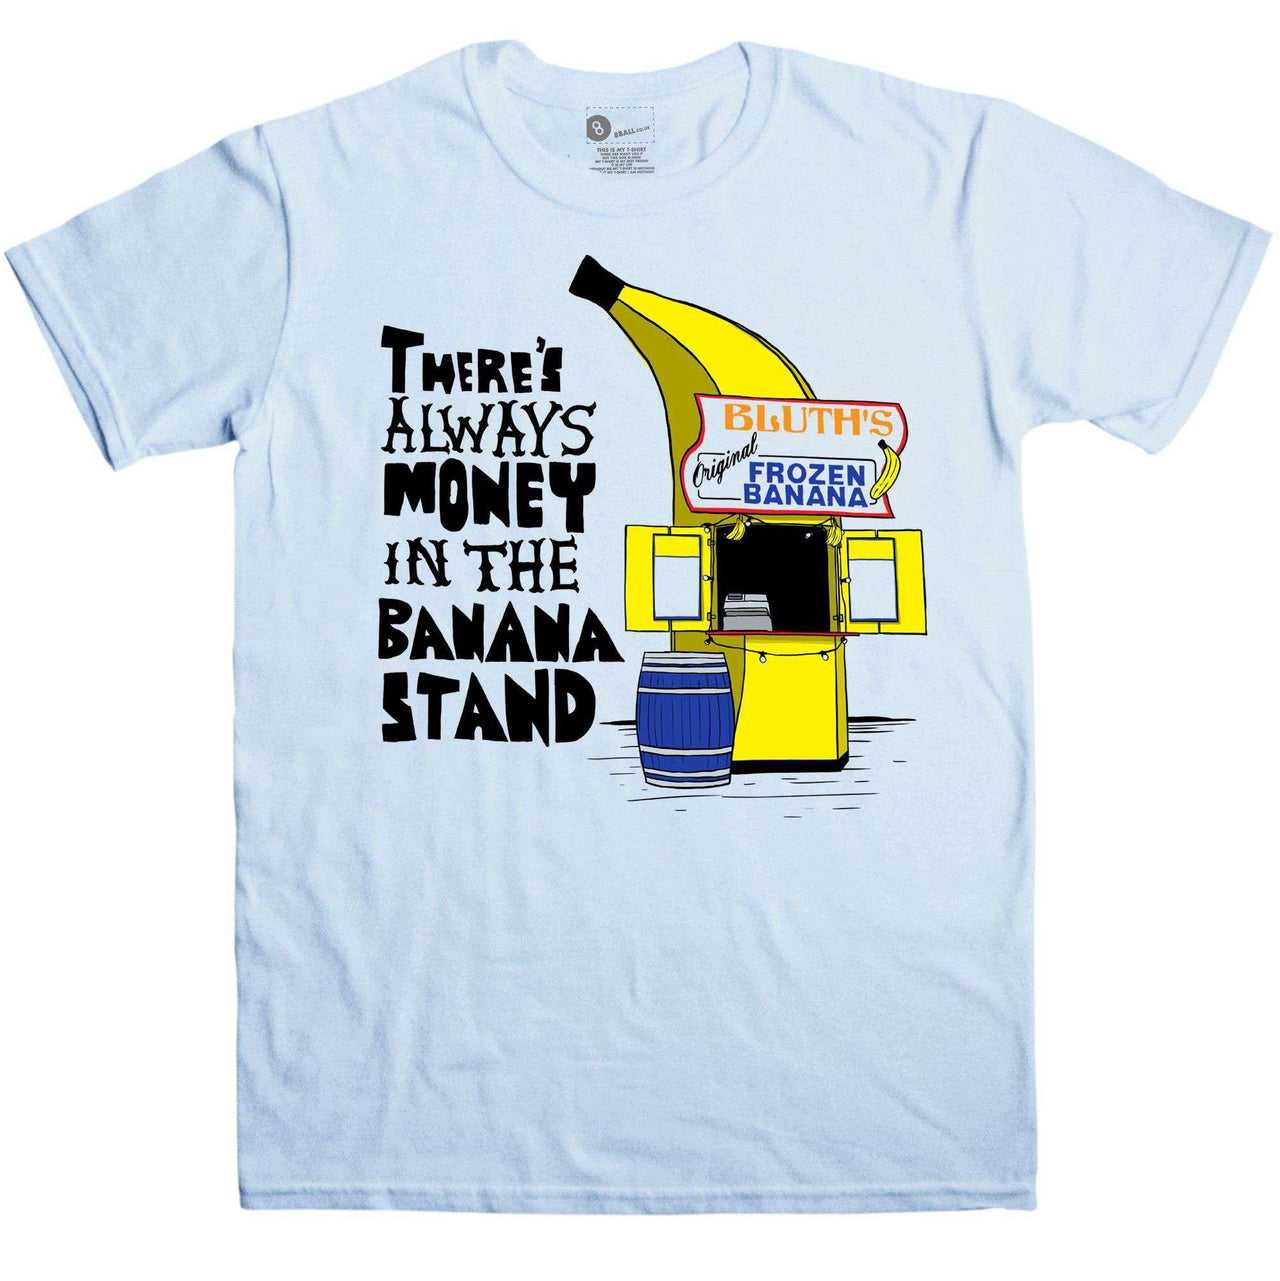 Banana Stand T-Shirt For Men, Inspired By Arrested Development 8Ball